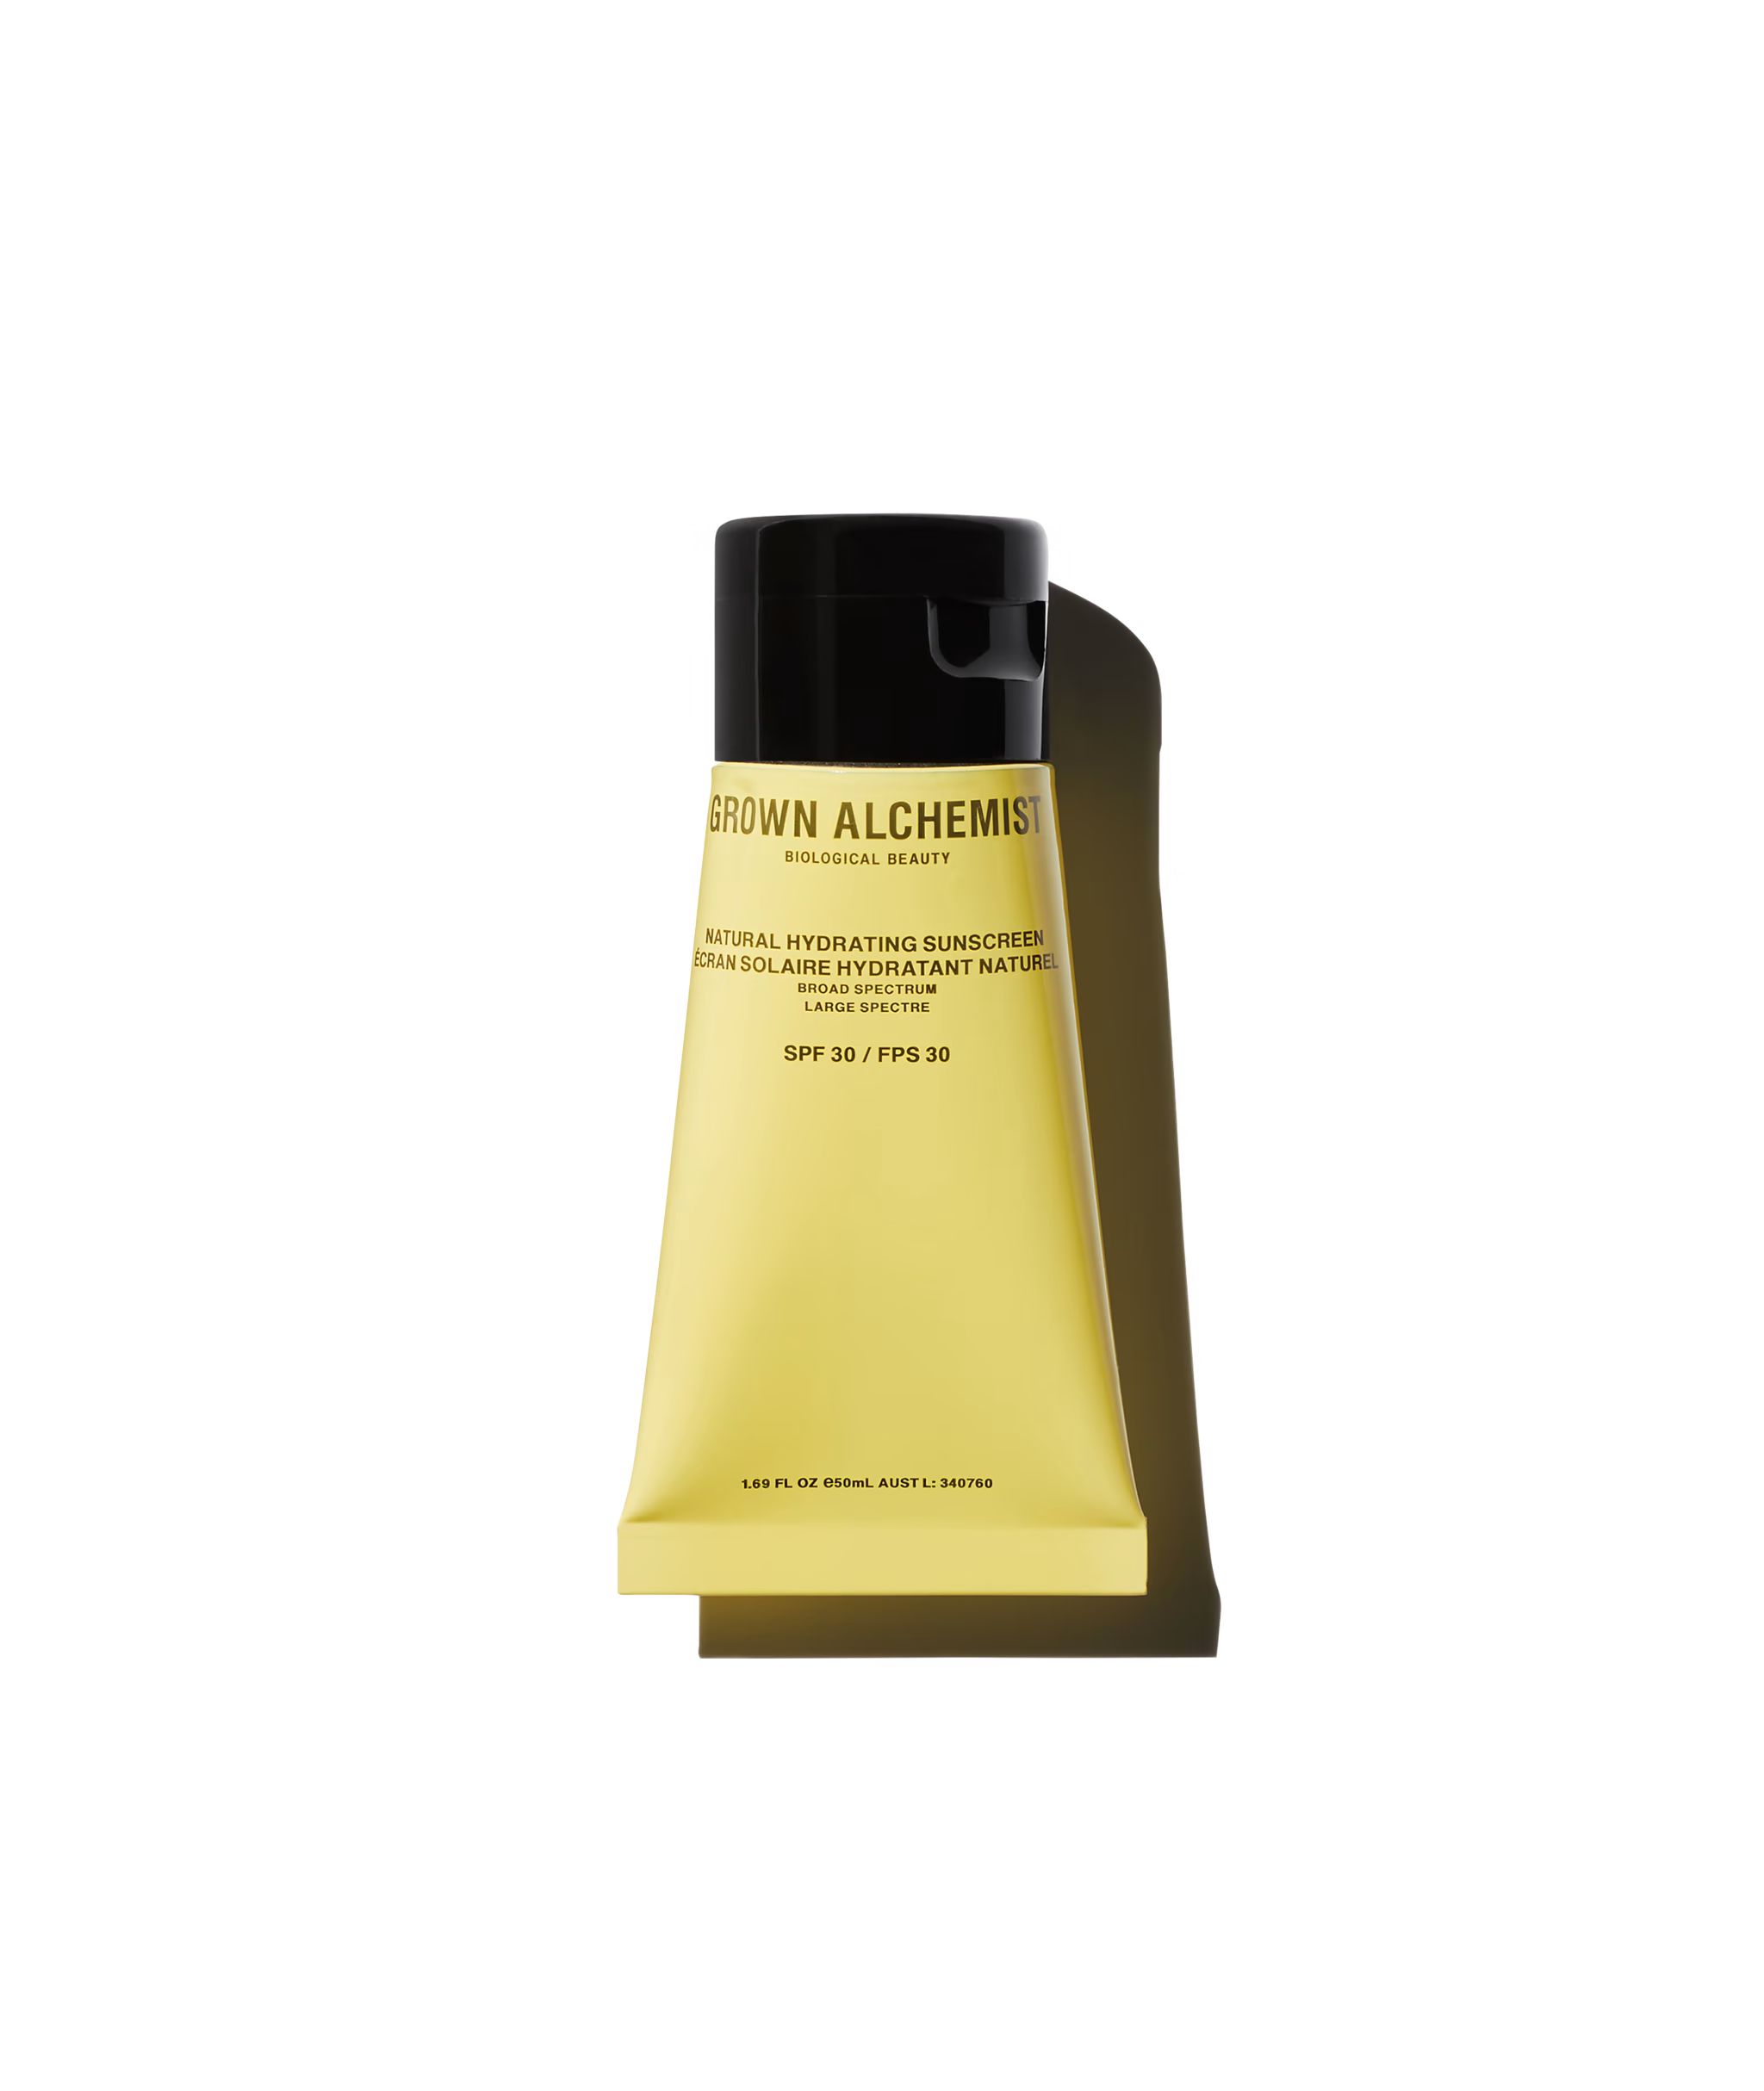 Natural Hydrating Mineral Sunscreen SPF30 | Grown Alchemist (US)